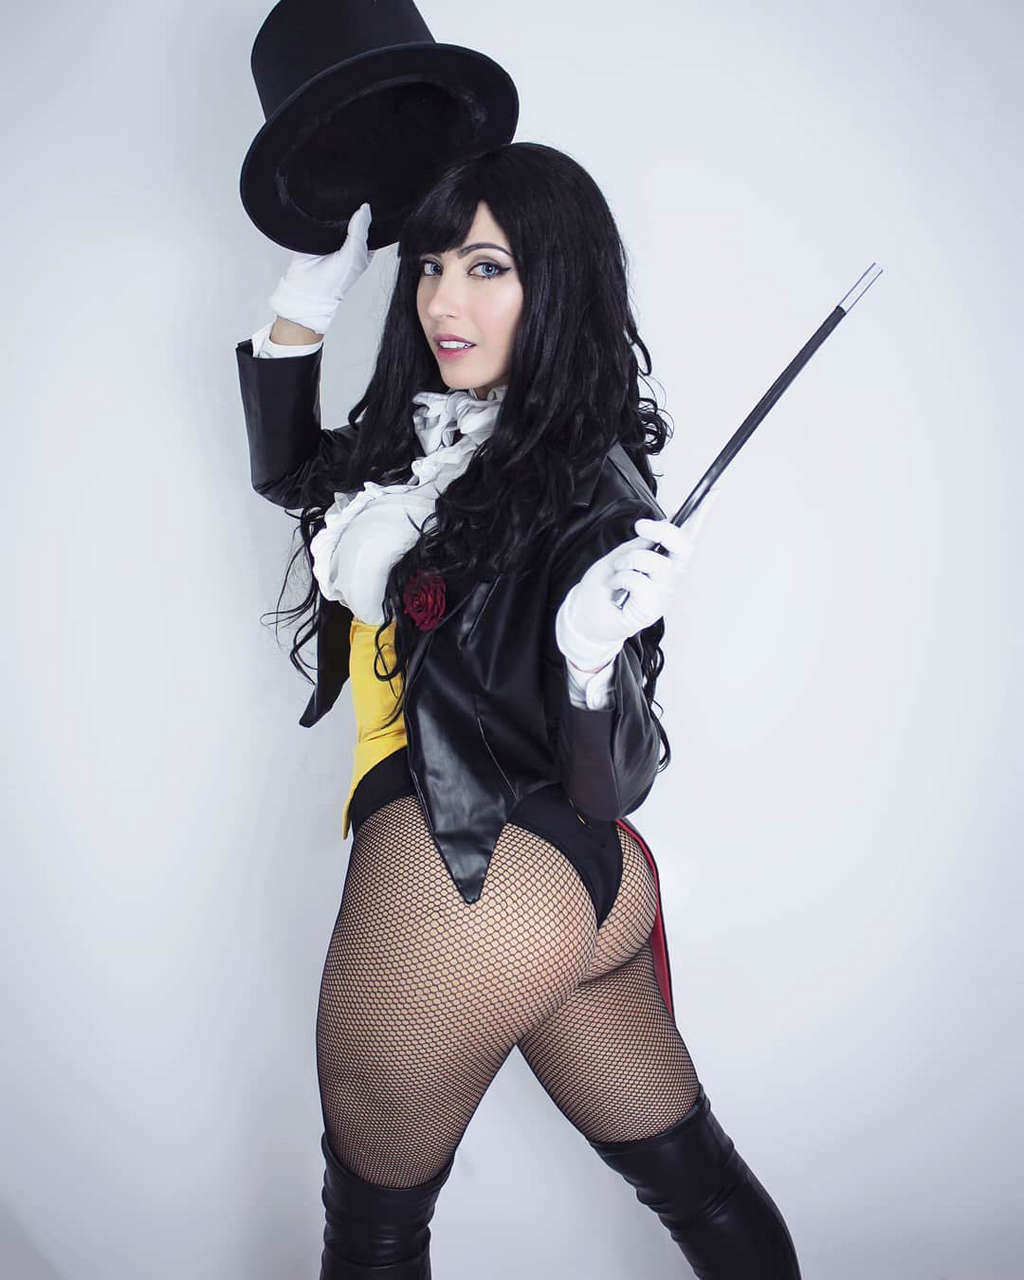 Say Hello To Zatanna By The Gorgeous Danielle Vadovell